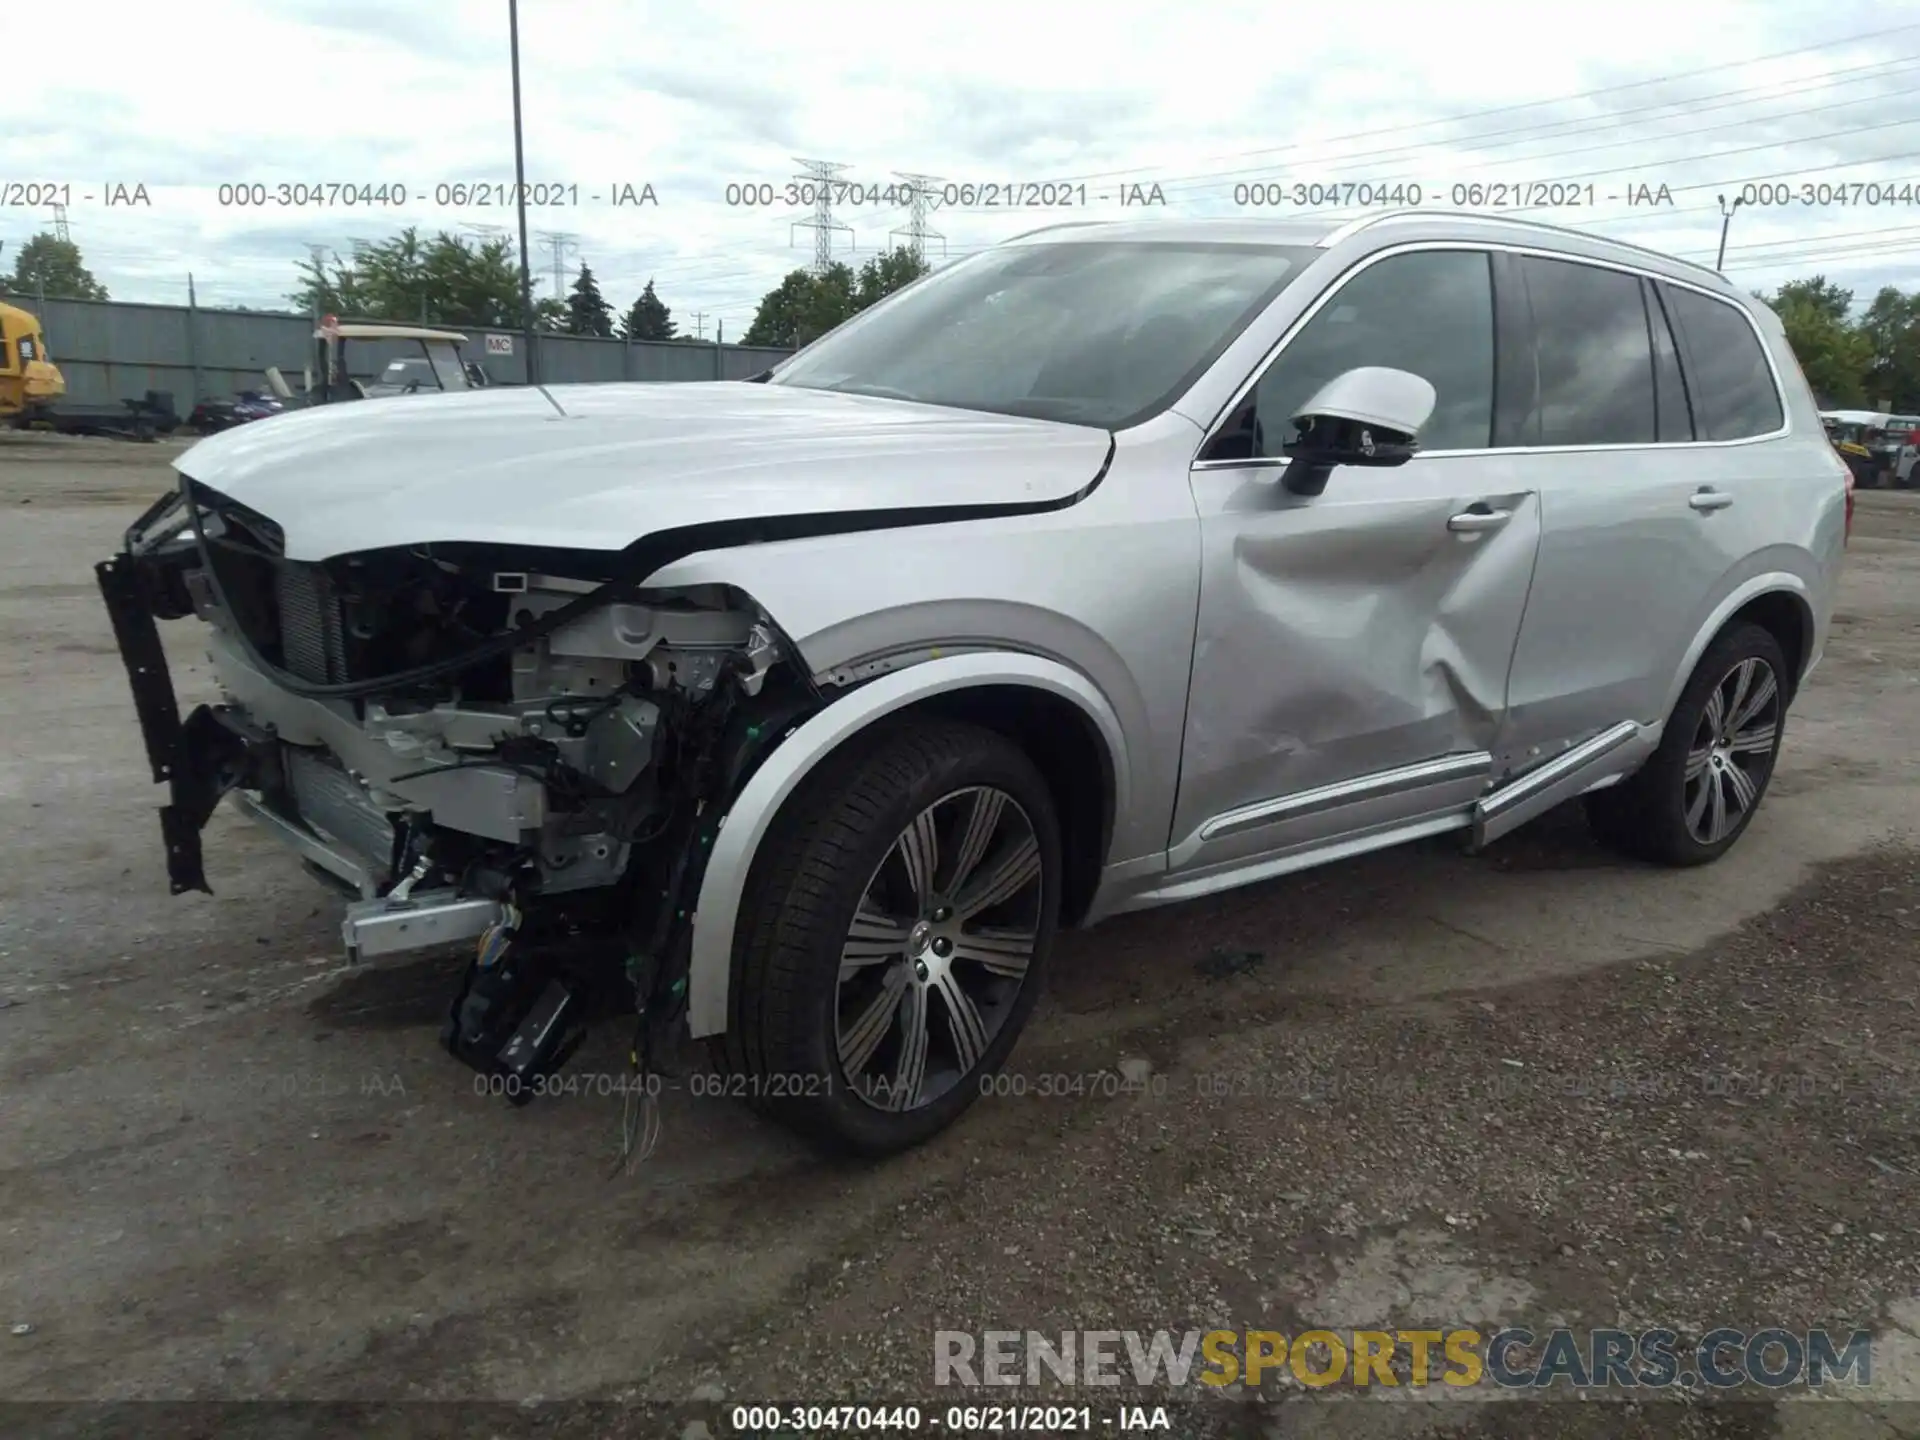 2 Photograph of a damaged car YV4A22PL0M1681008 VOLVO XC90 2021